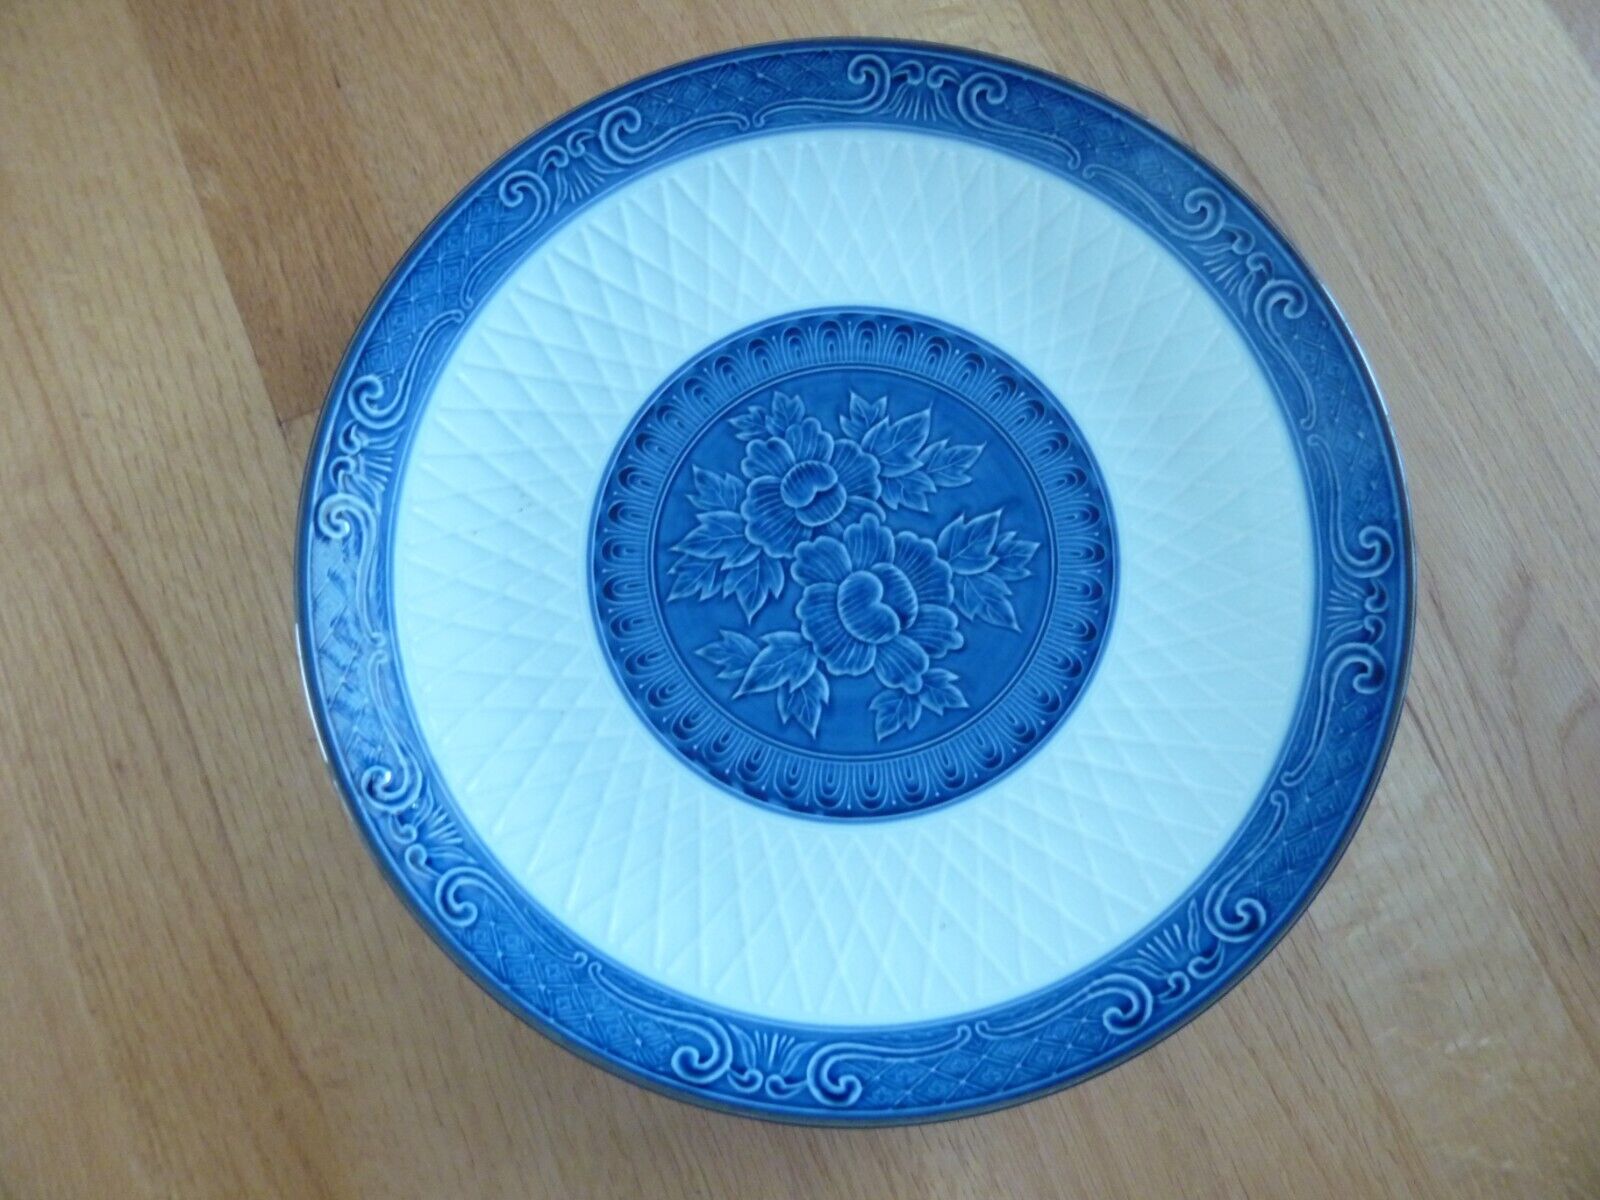 Toyo Japanese Porcelain Serving Plate Cobalt Blue and White Peony Made in Japan